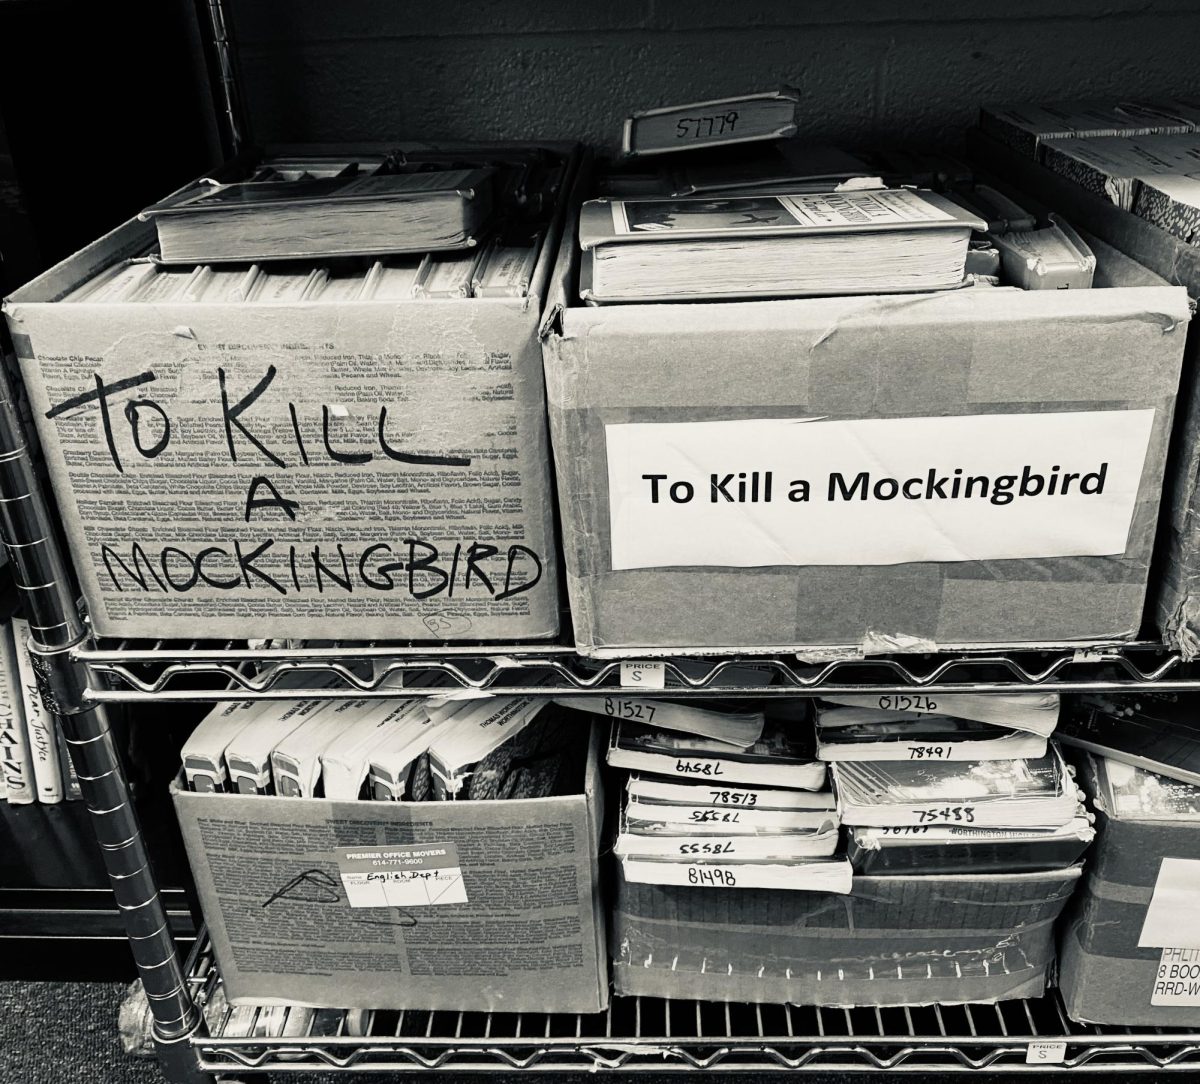 To Kill a Mockingbird by Harper Lee being shelved while not in use. The book is usually used during freshman year English classes, however has been getting used less and less due to it becoming outdated.